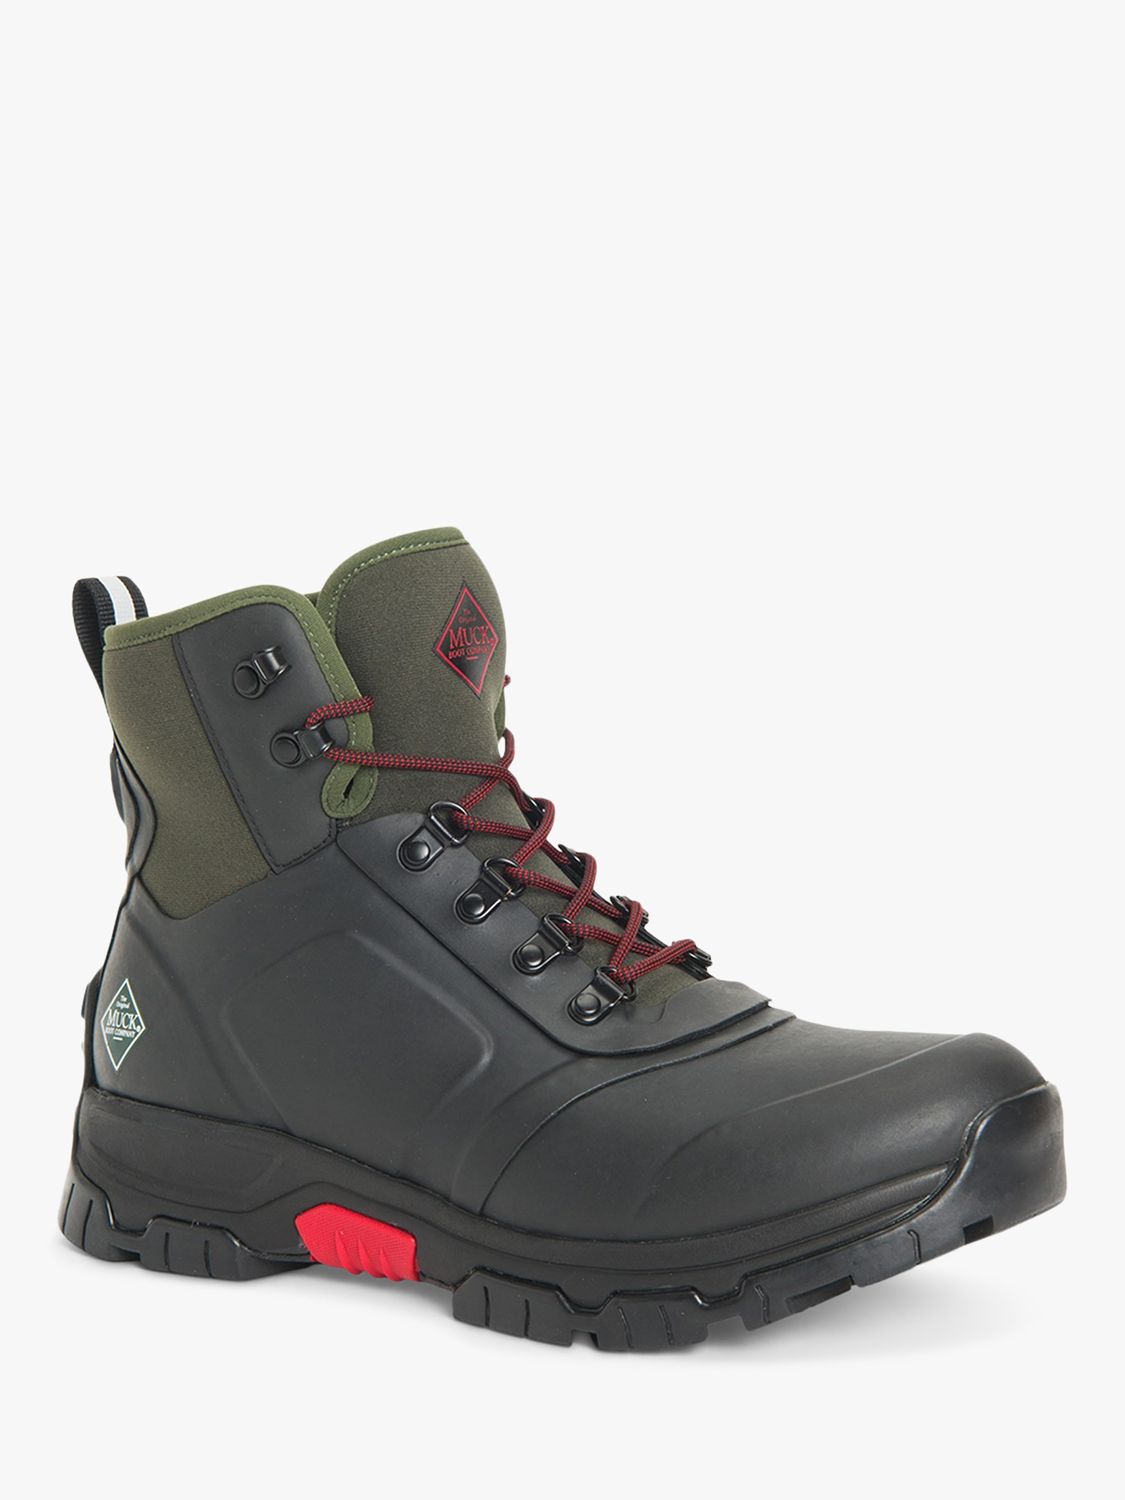 Buy Muck Apex Lace Up Mid Wellington Boots, Black Online at johnlewis.com